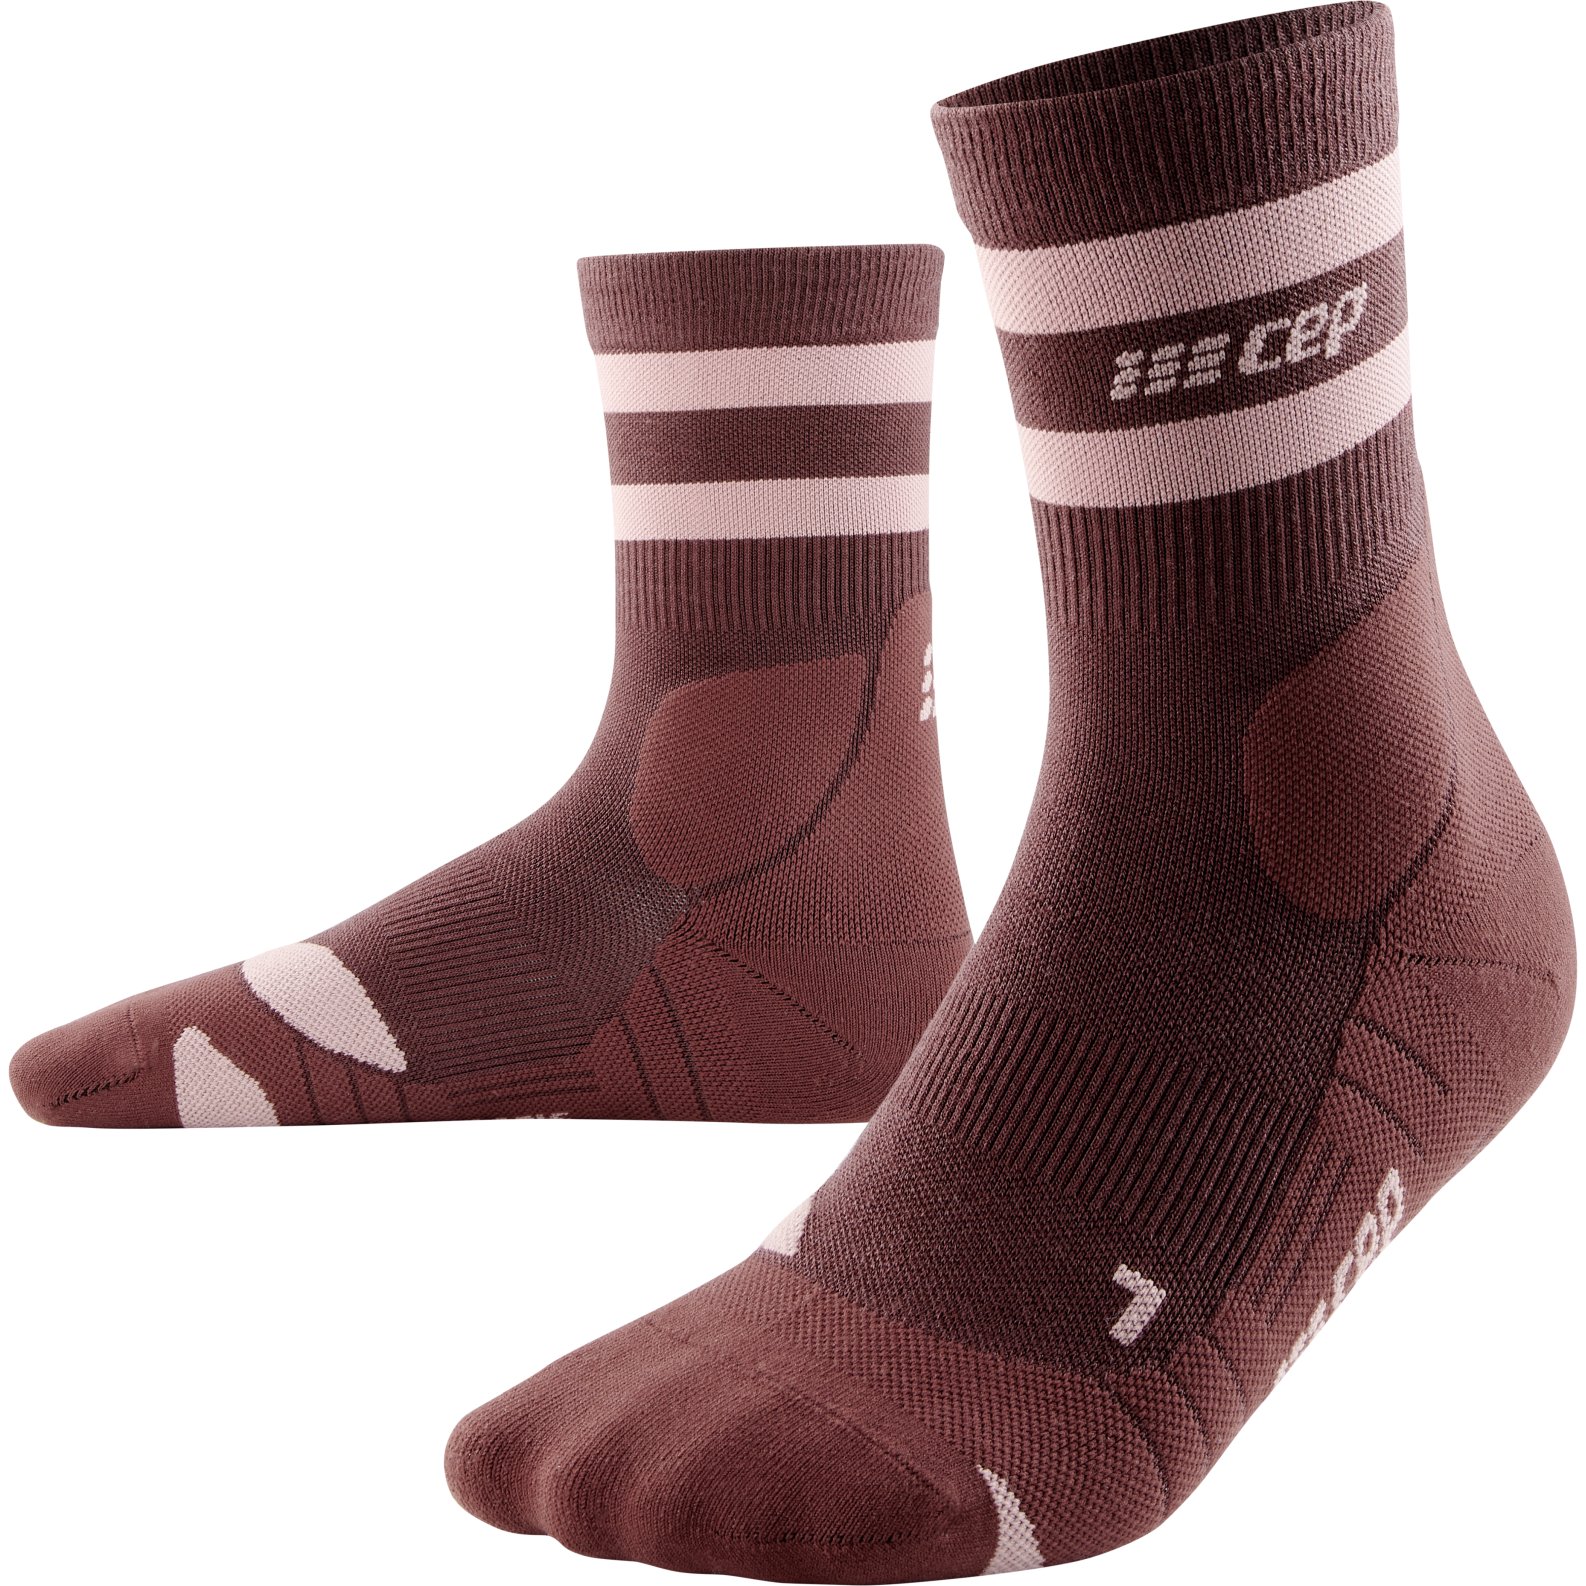 Picture of CEP Hiking 80s Mid Cut Compression Socks Women - brown/rose